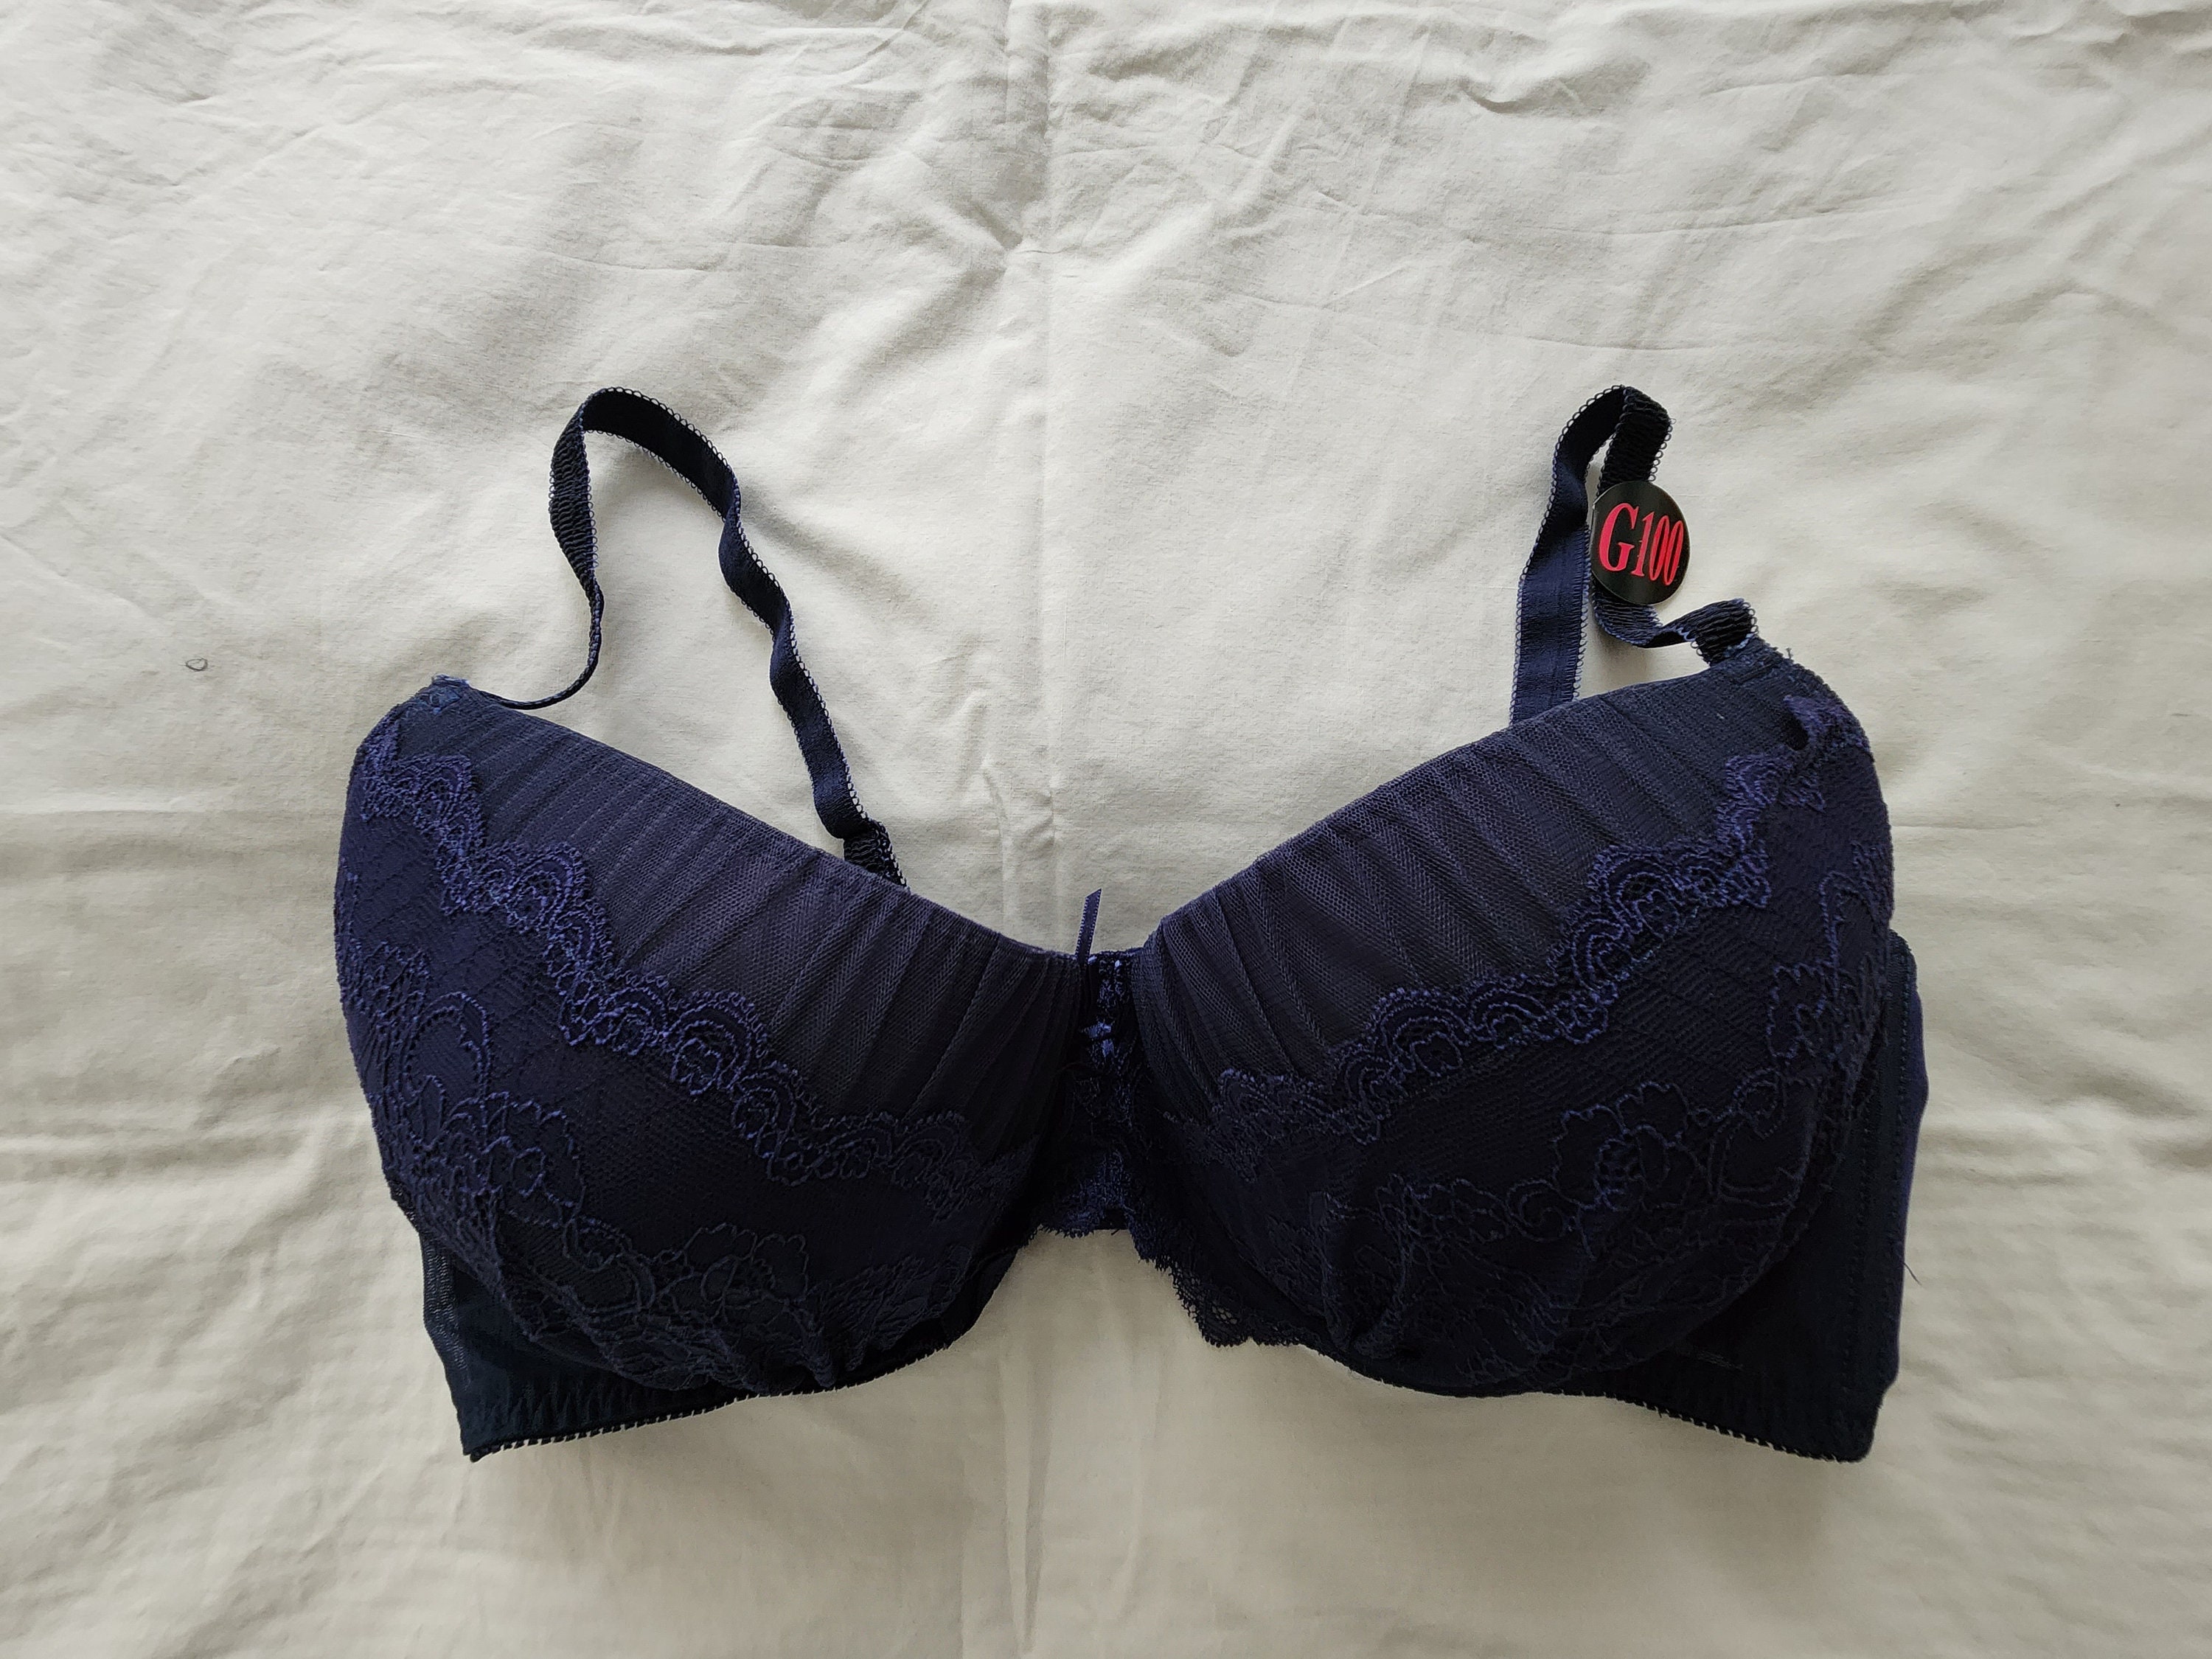 New/old Stock Bra From Japan size 20D Aus & 42D UK/US, Japan G100 -   Israel